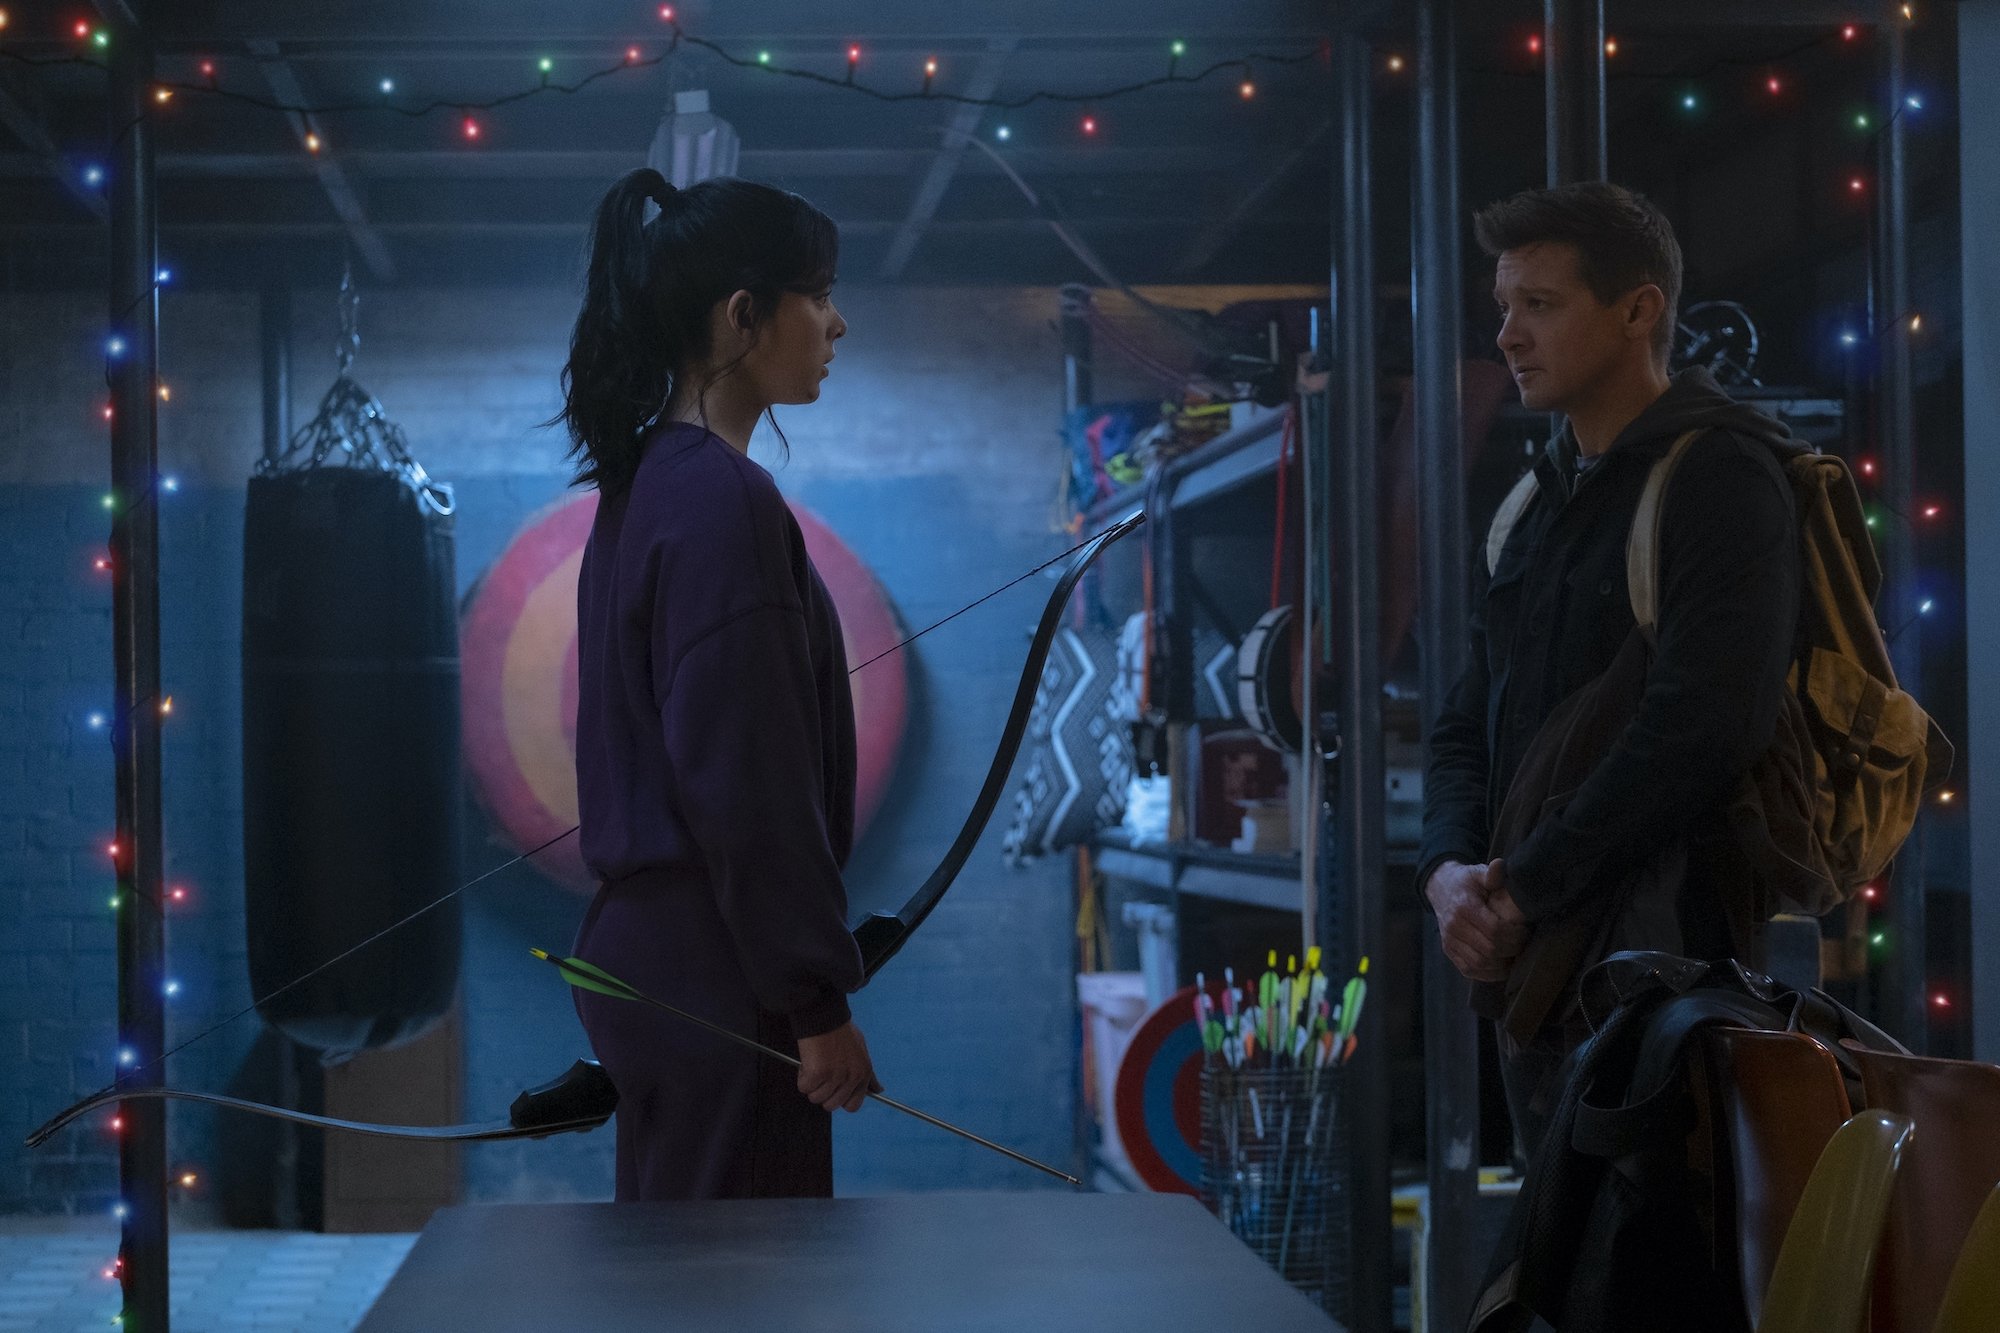 Where Is Spider-Man in ‘Hawkeye’? The Show Takes Place in New York City, but Peter Park Isn’t Working With Kate Bishop